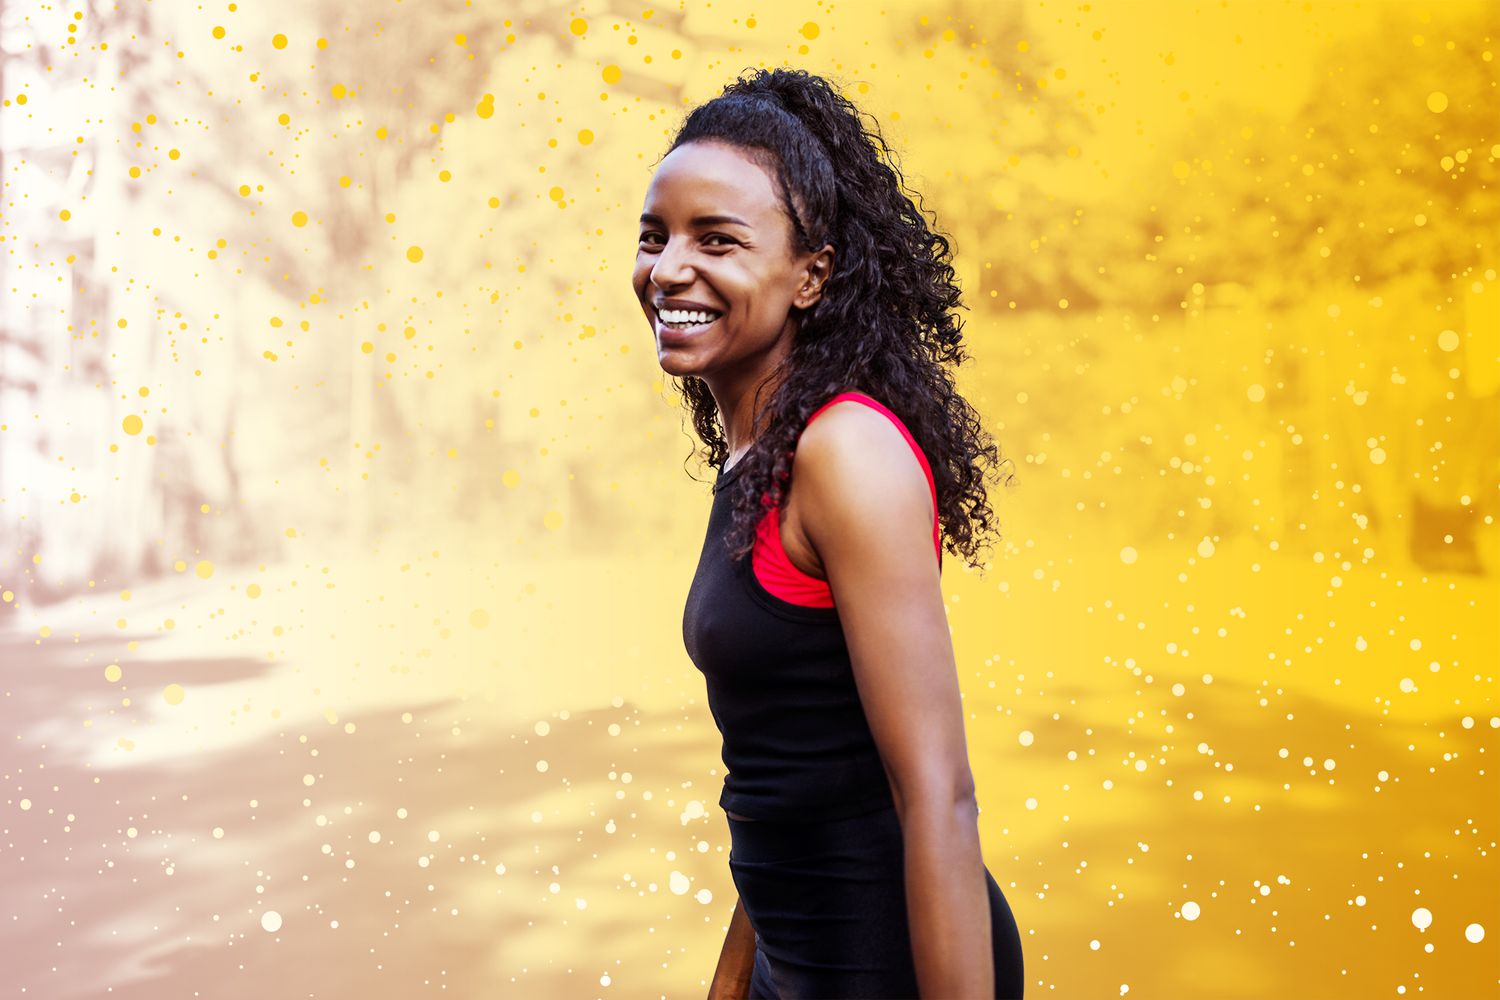 A woman smiling outside while wearing workout clothing